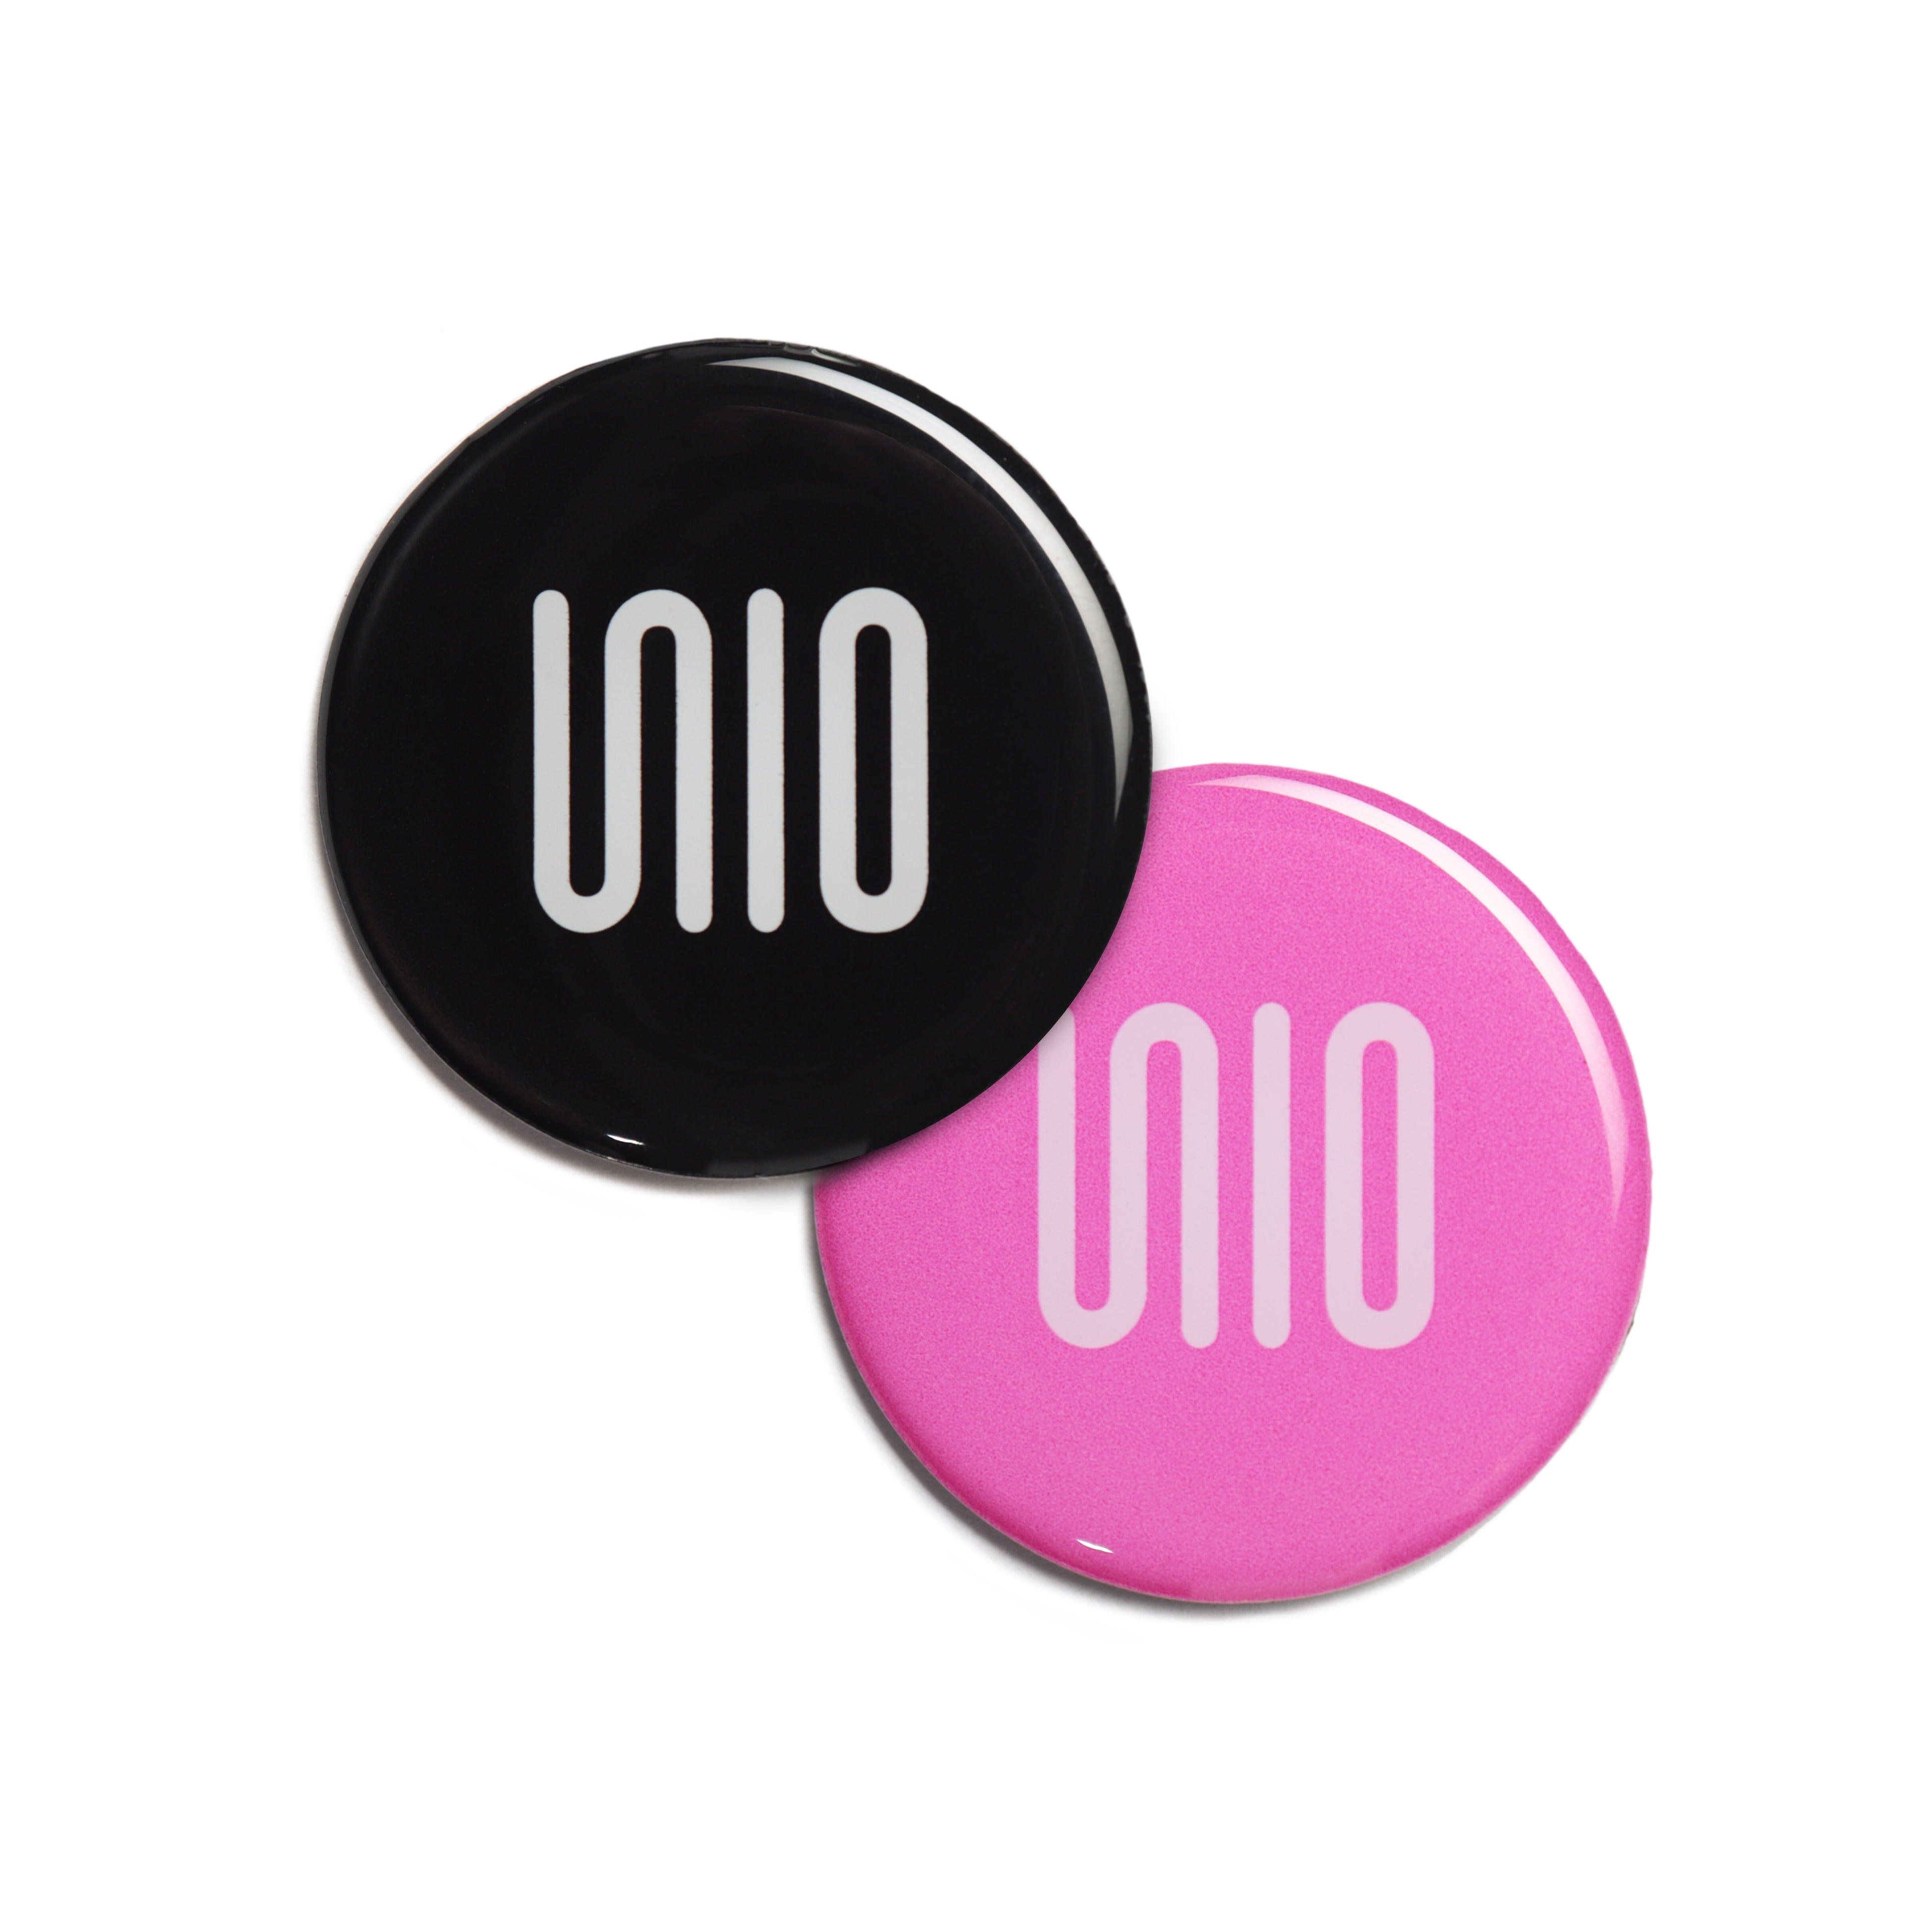 UNIO NFC Tag, Digital Information Sharing and Phone Accessory